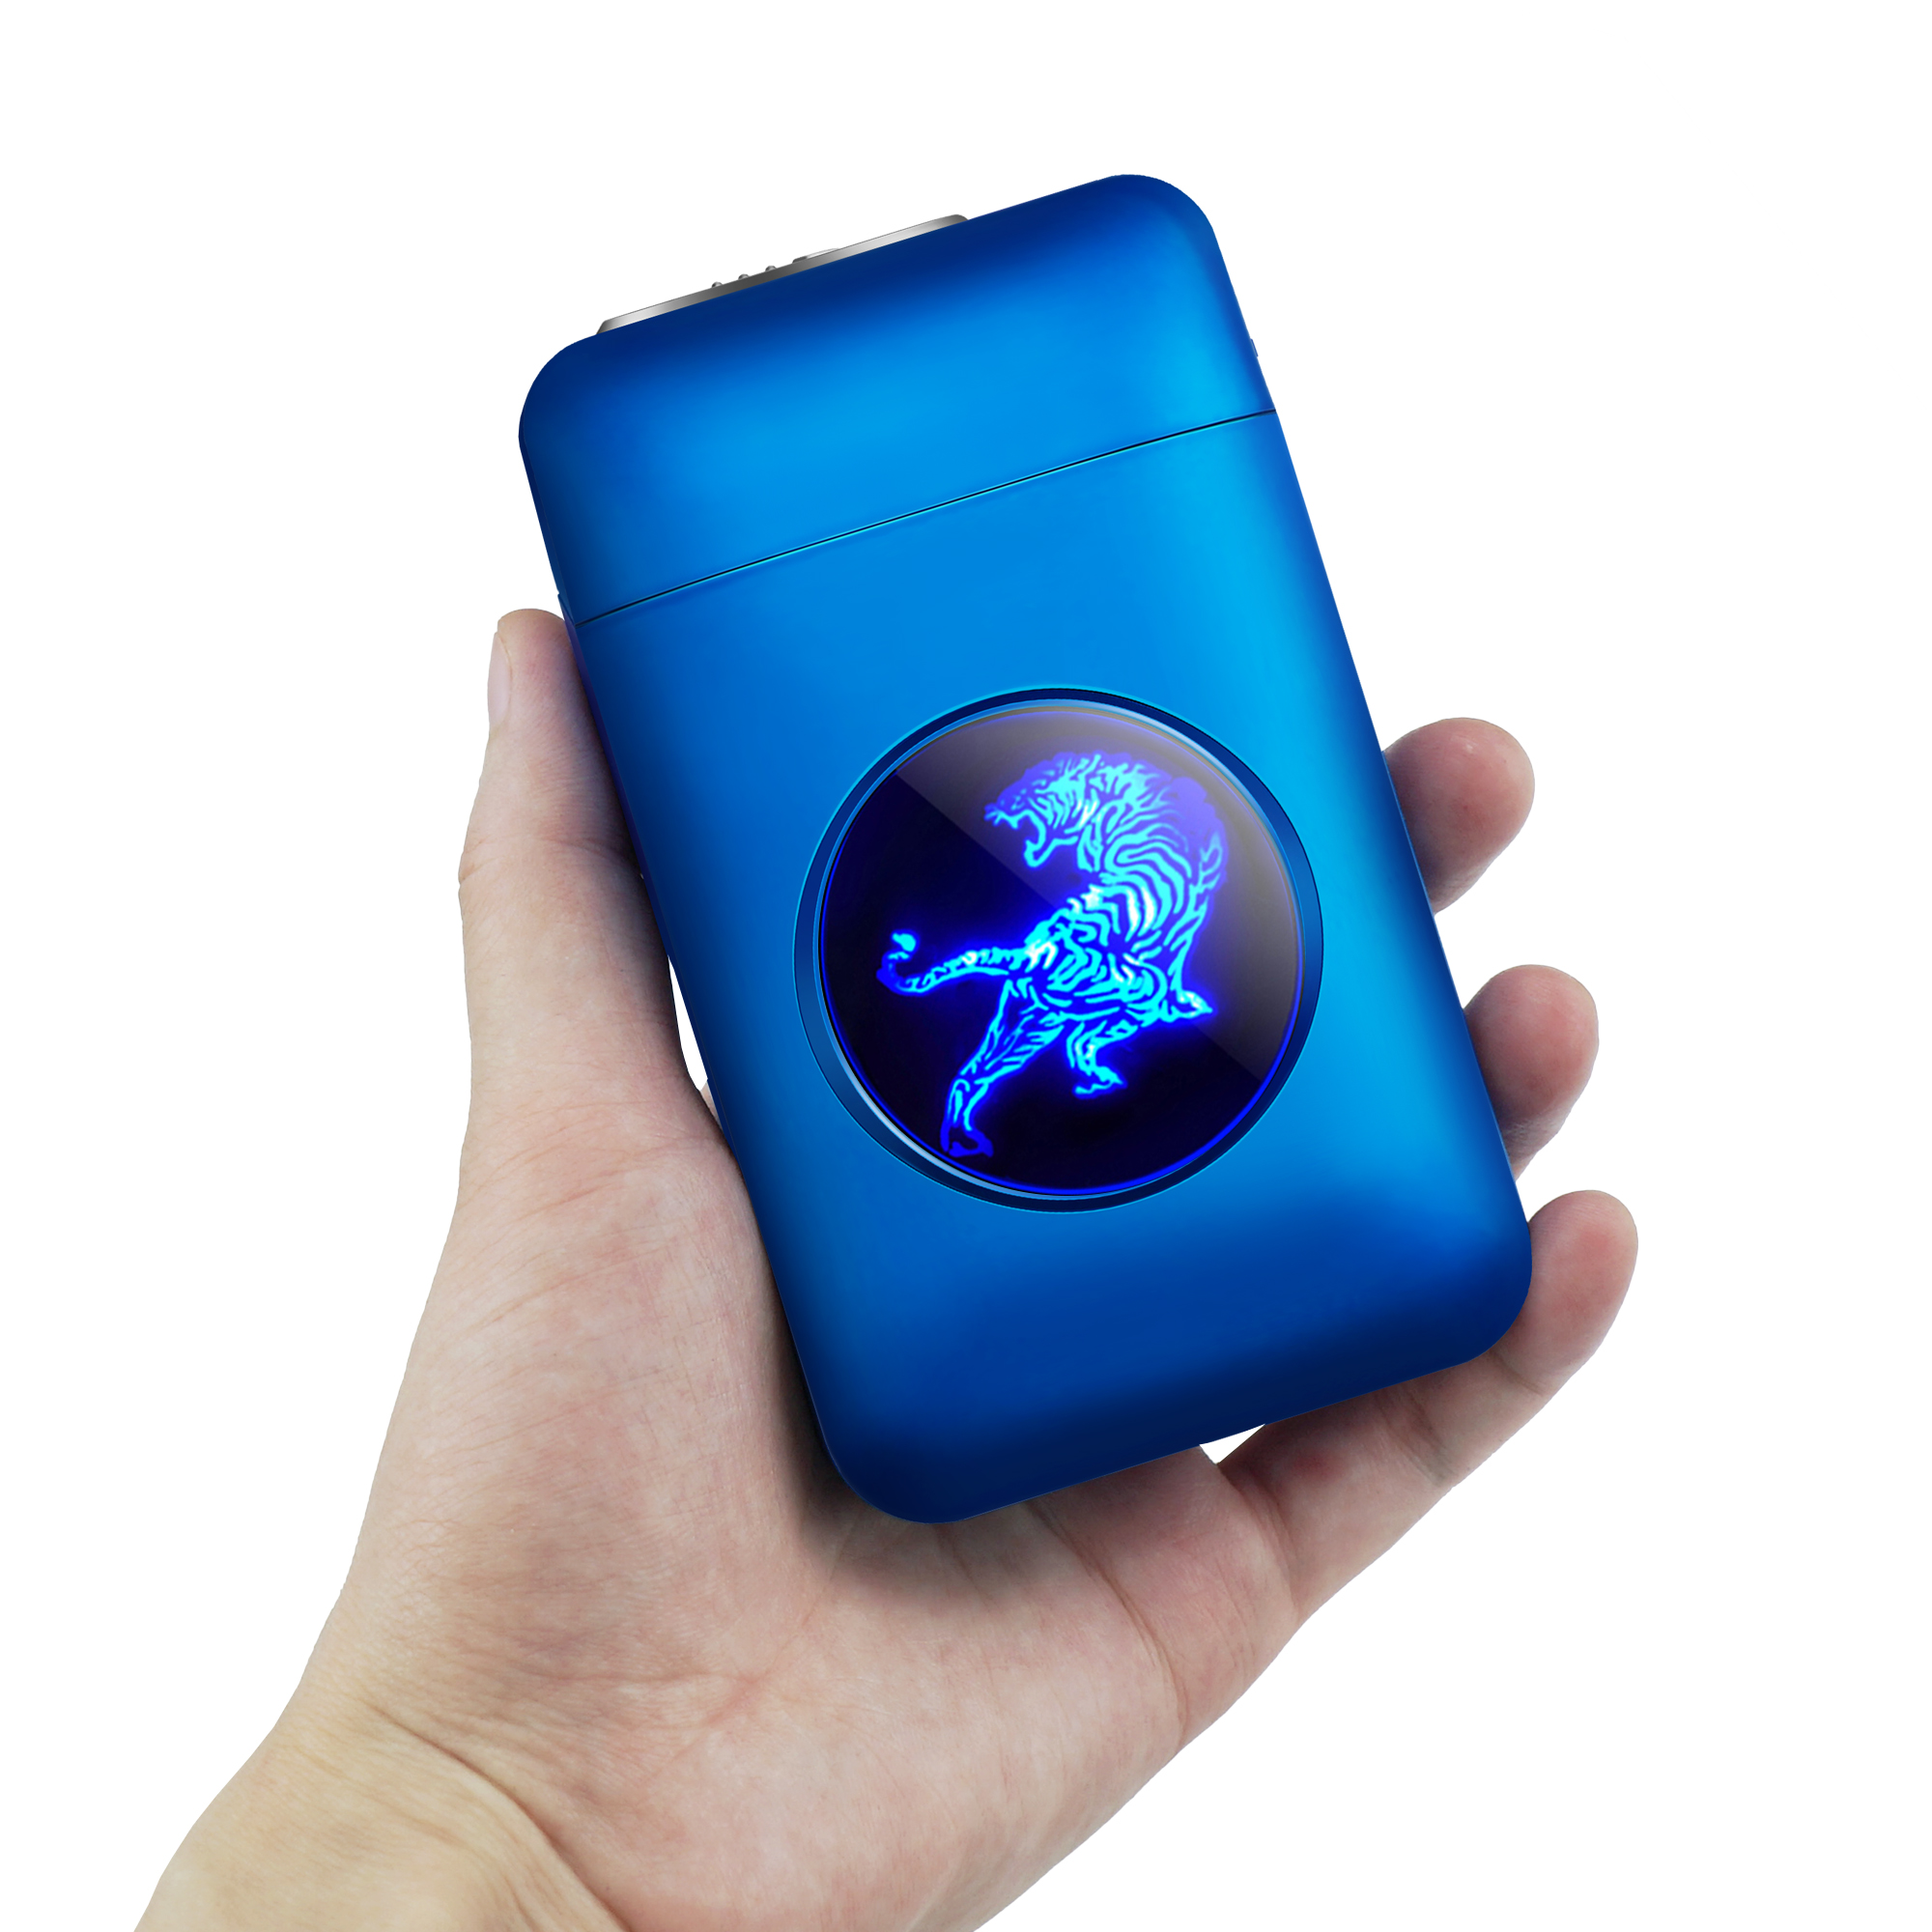 Cigarette Case Box With USB Lighter 19pcs Capacity Cigarette Holder Rechargeable LED Display Windproof Lighter Smoking Gadget